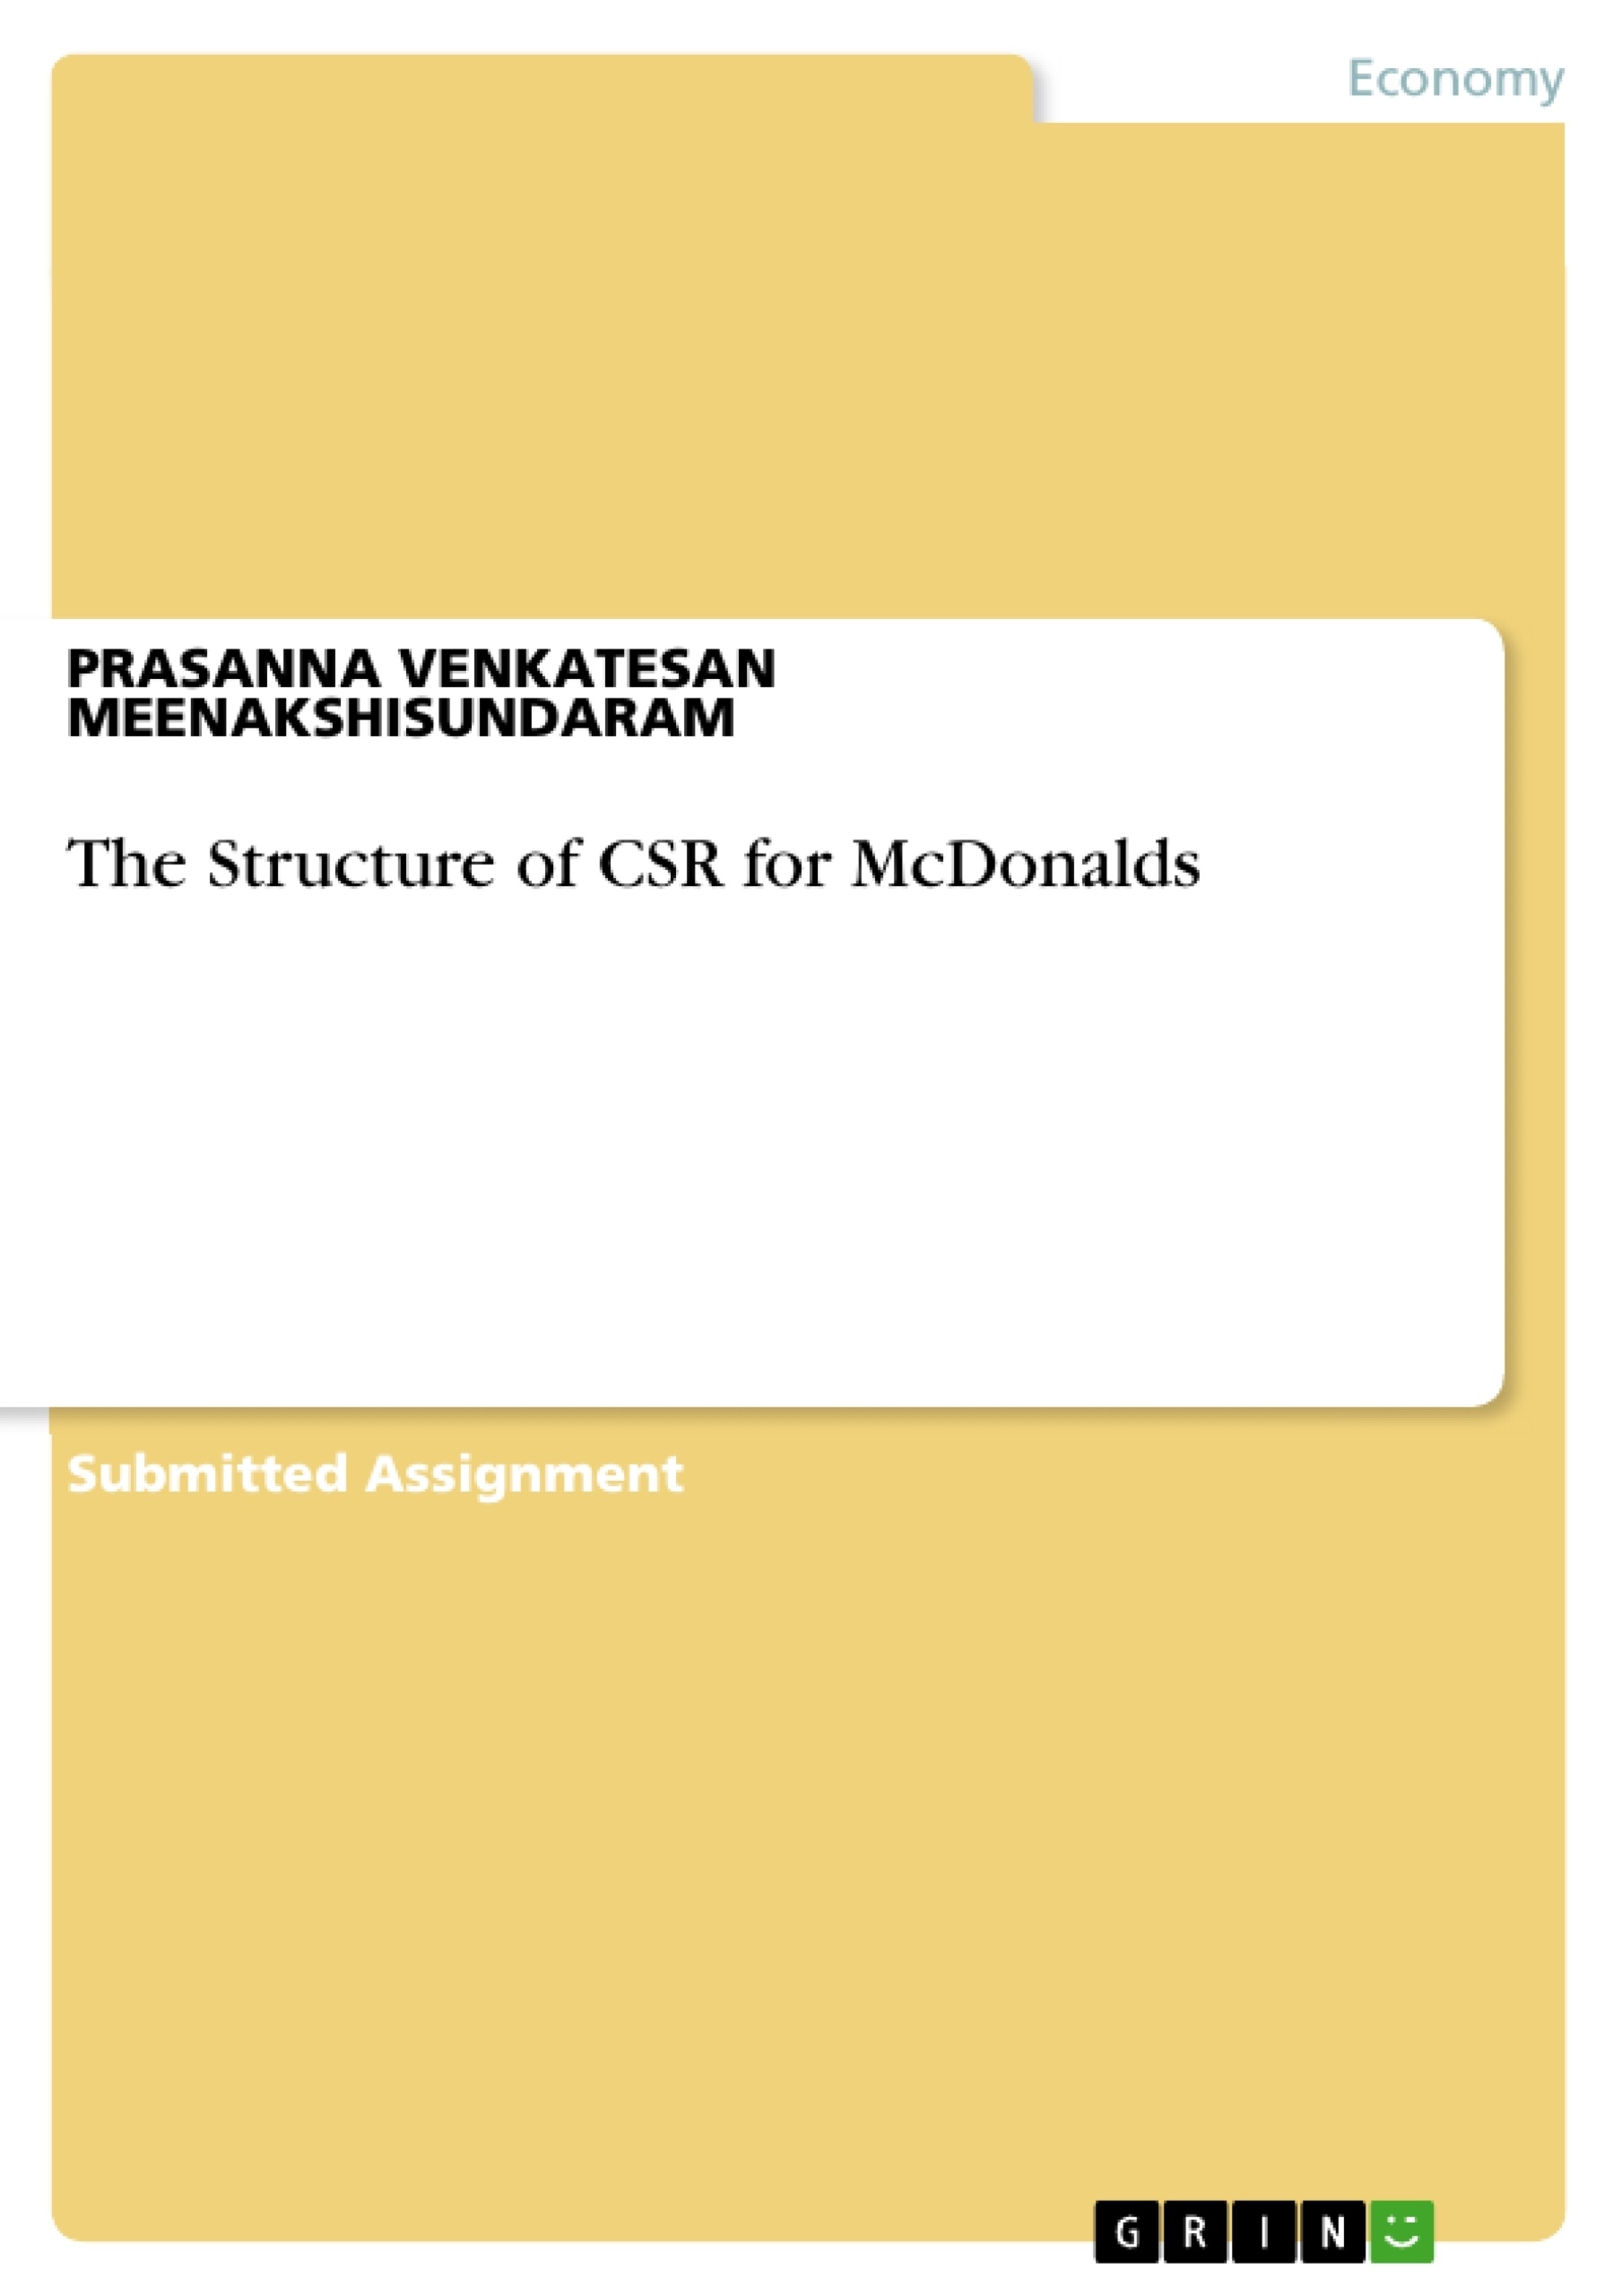 Title: The Structure of CSR for McDonalds